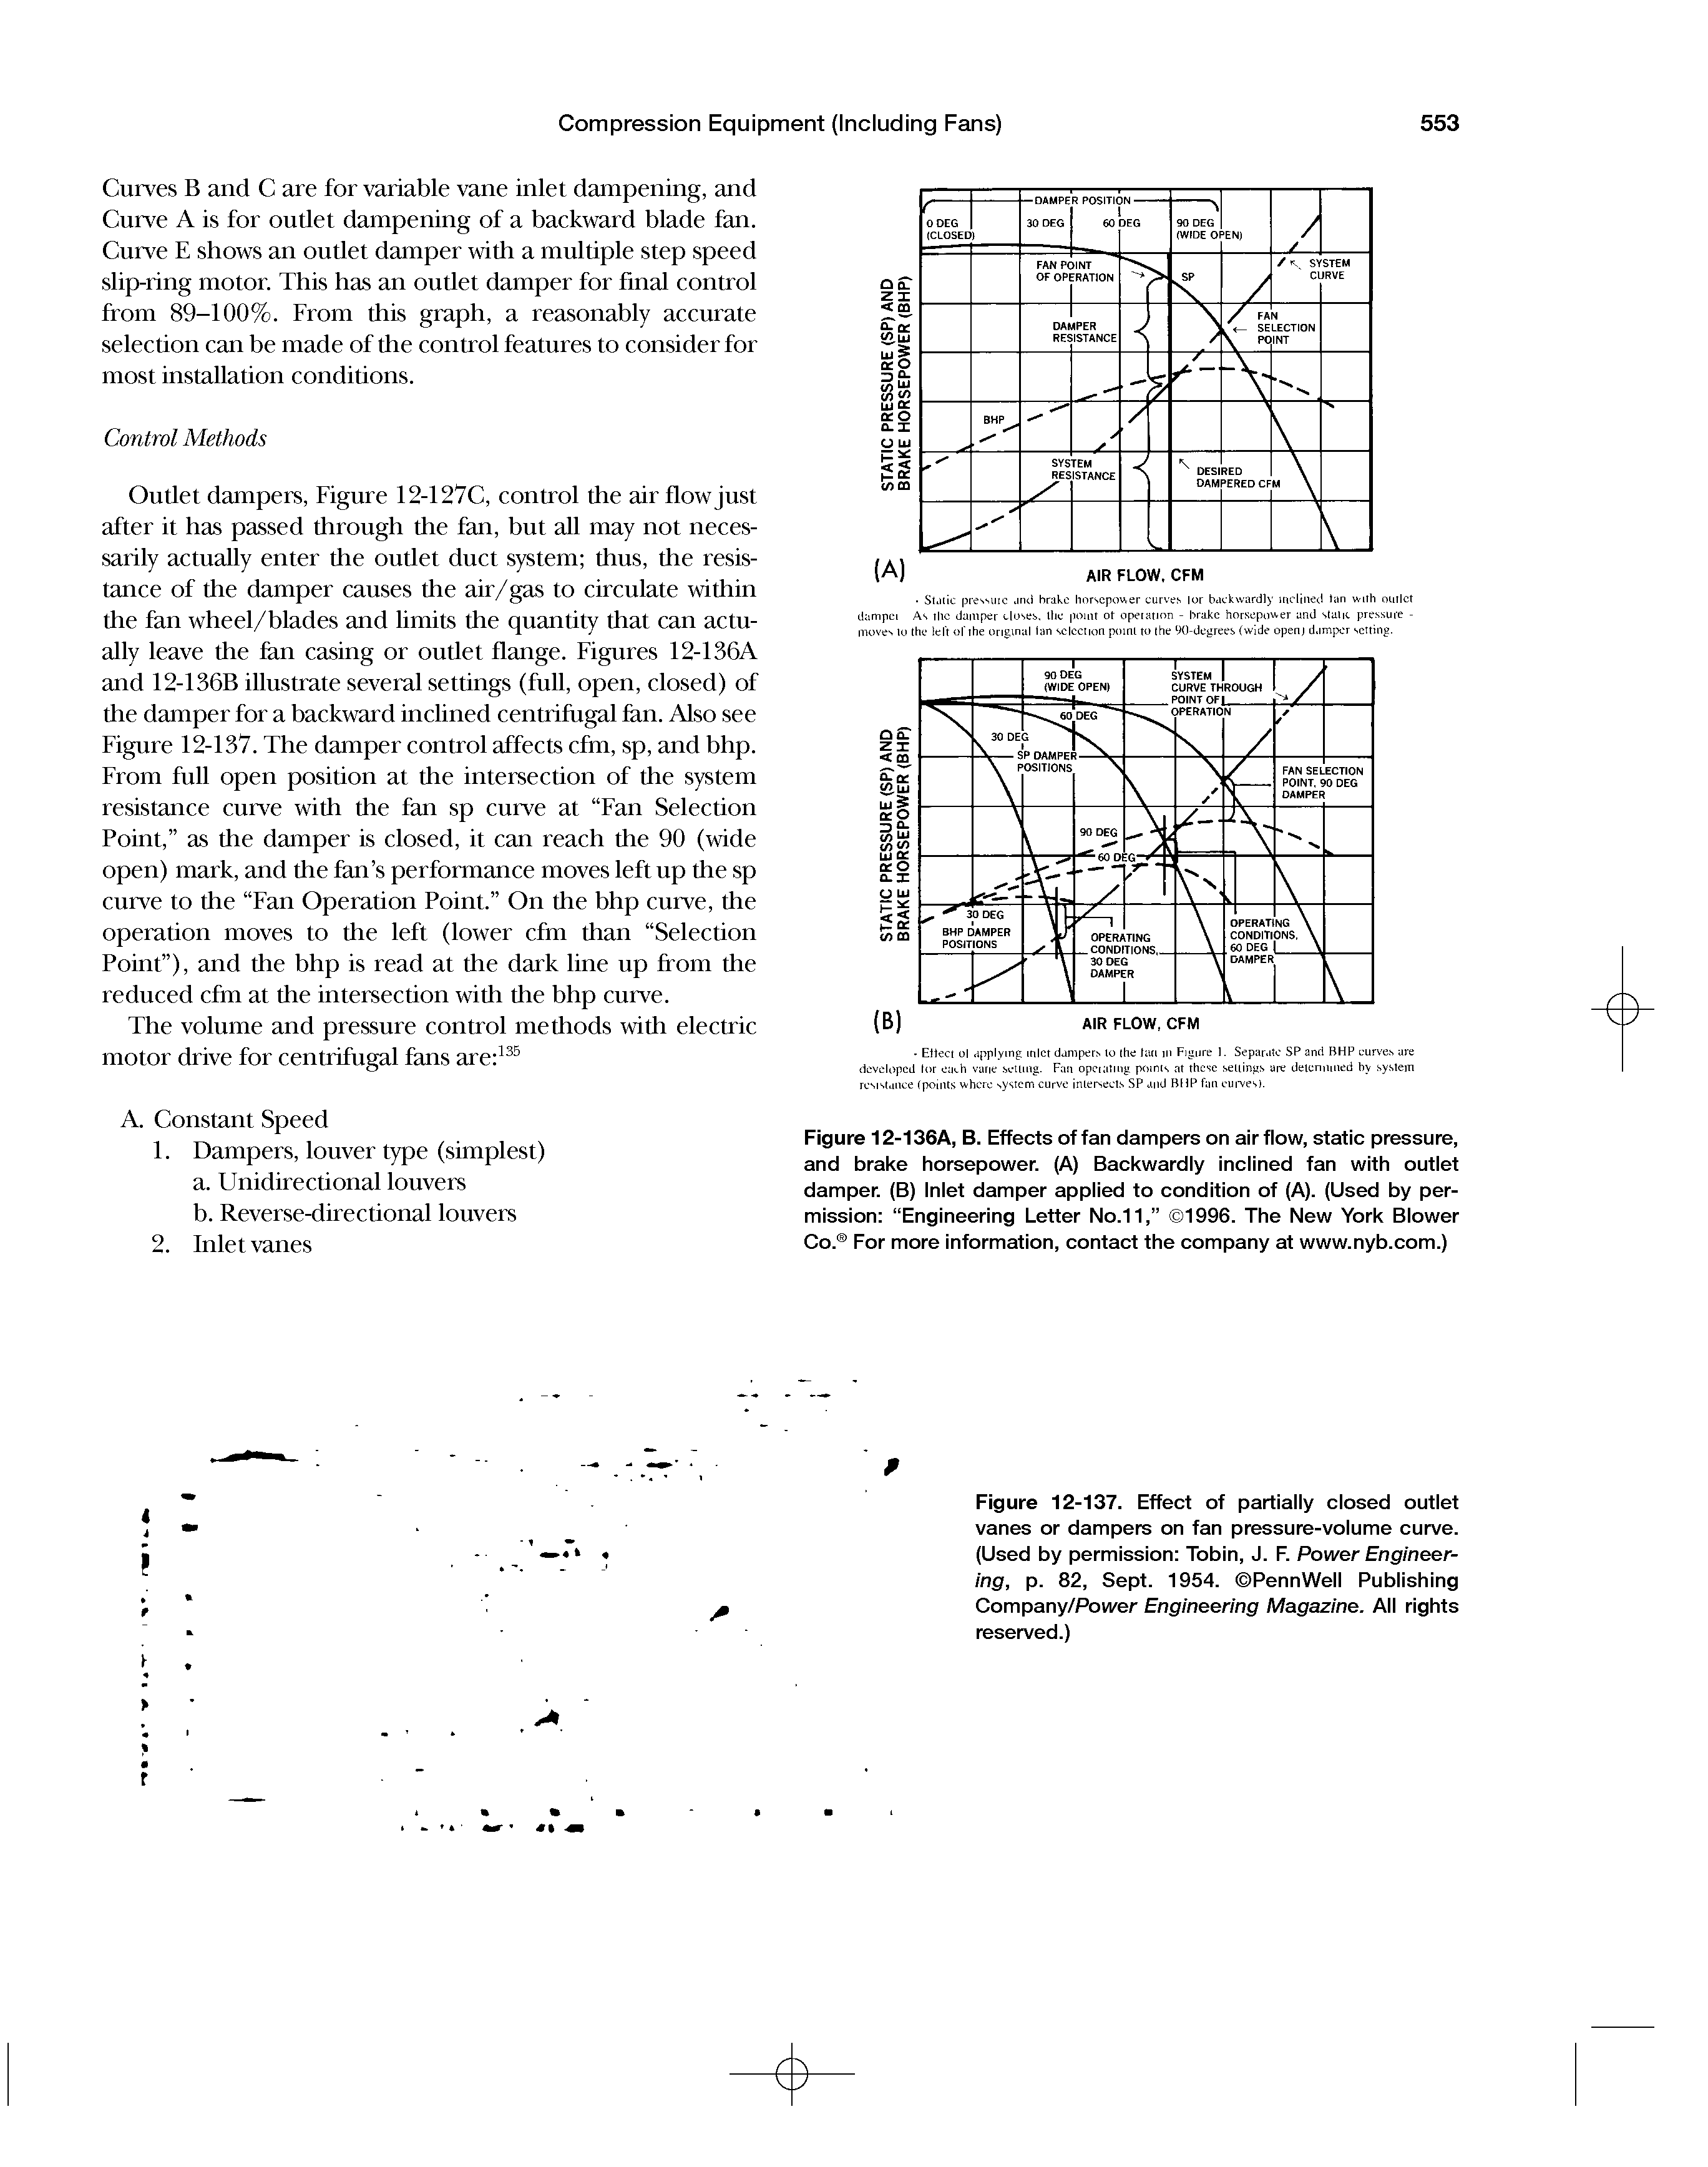 Figure 12-136A, B. Effects of fan dampers on airflow, static pressure, and brake horsepower. (A) Backwardiy inciined fan with outiet damper. (B) iniet damper appiied to condition of (A). (Used by permission Engineering Letter No.11, 1996. The New York Biower Co. For more information, contact the company at www.nyb.com.)...